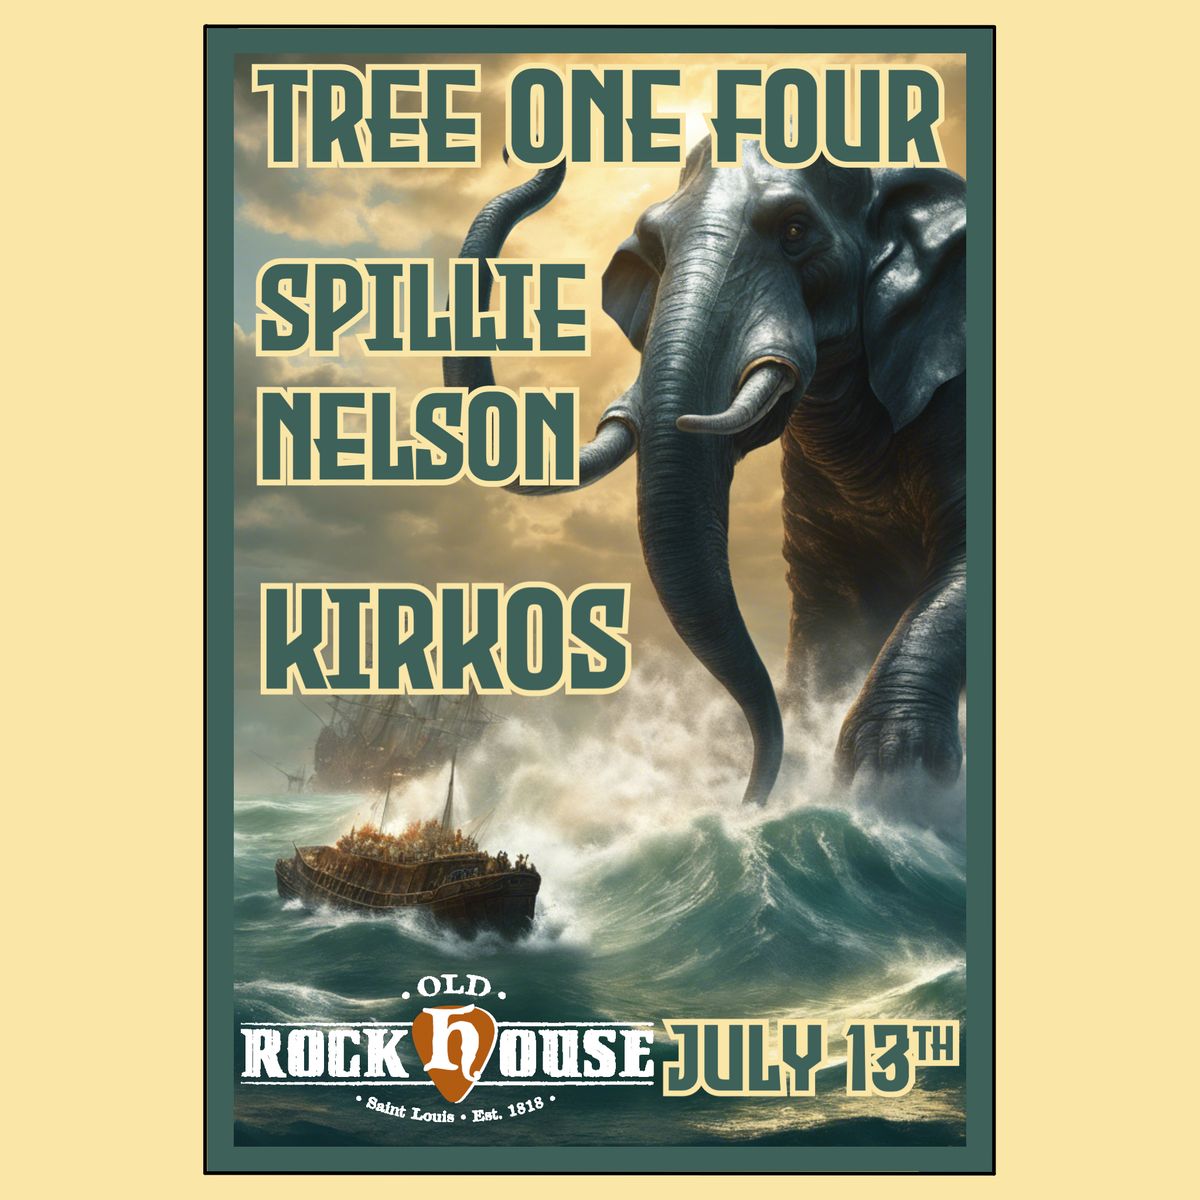 Tree One Four + Spillie Nelson + Kirkos at Old Rock House